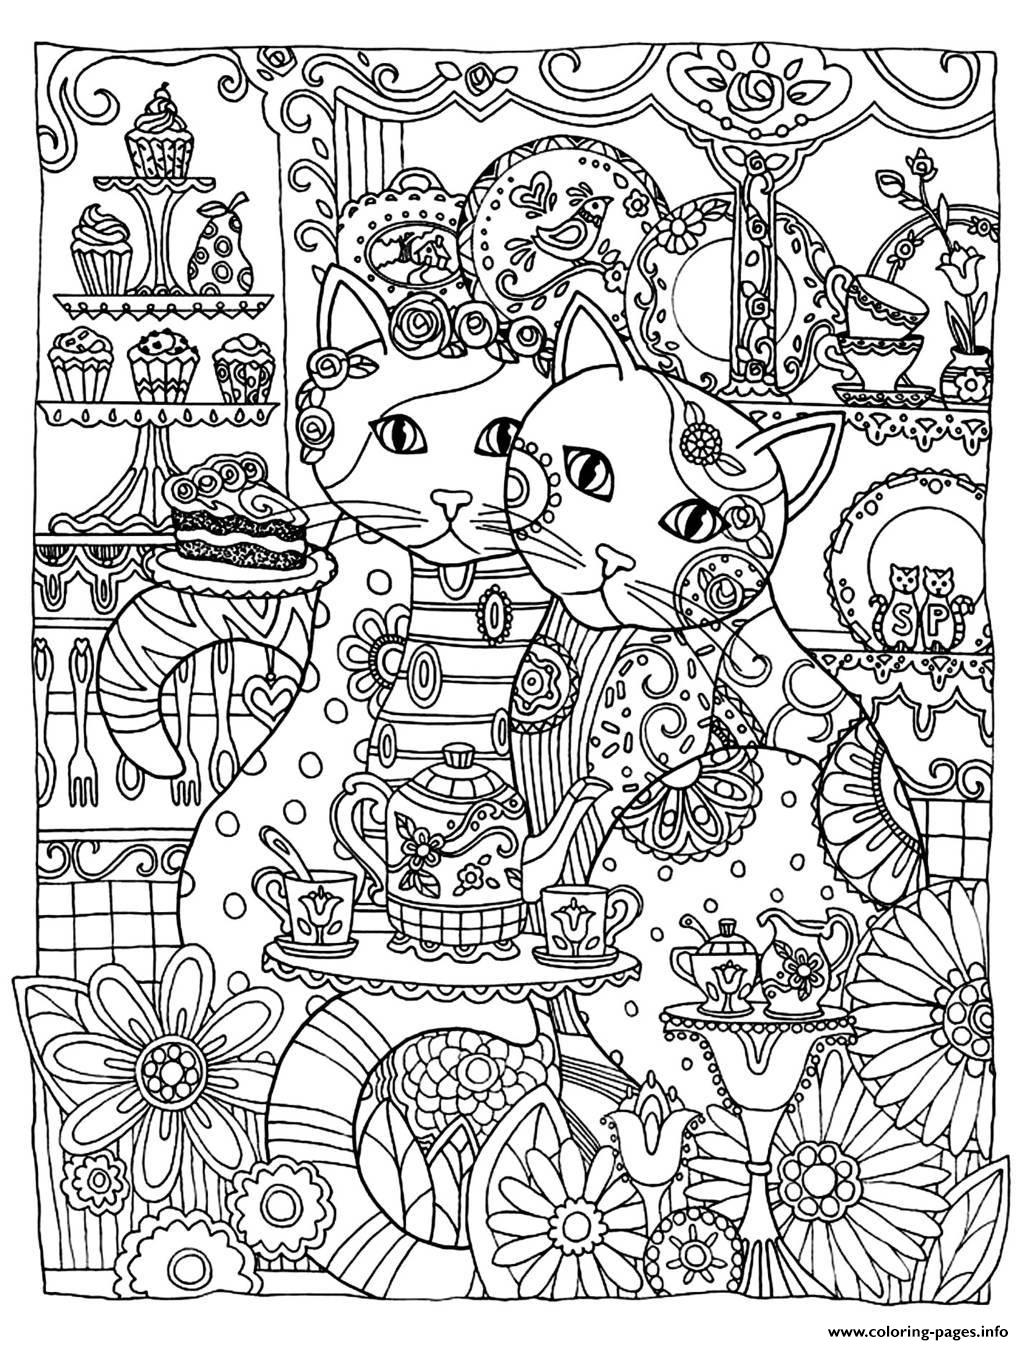 Adult Two Cute Cats coloring pages